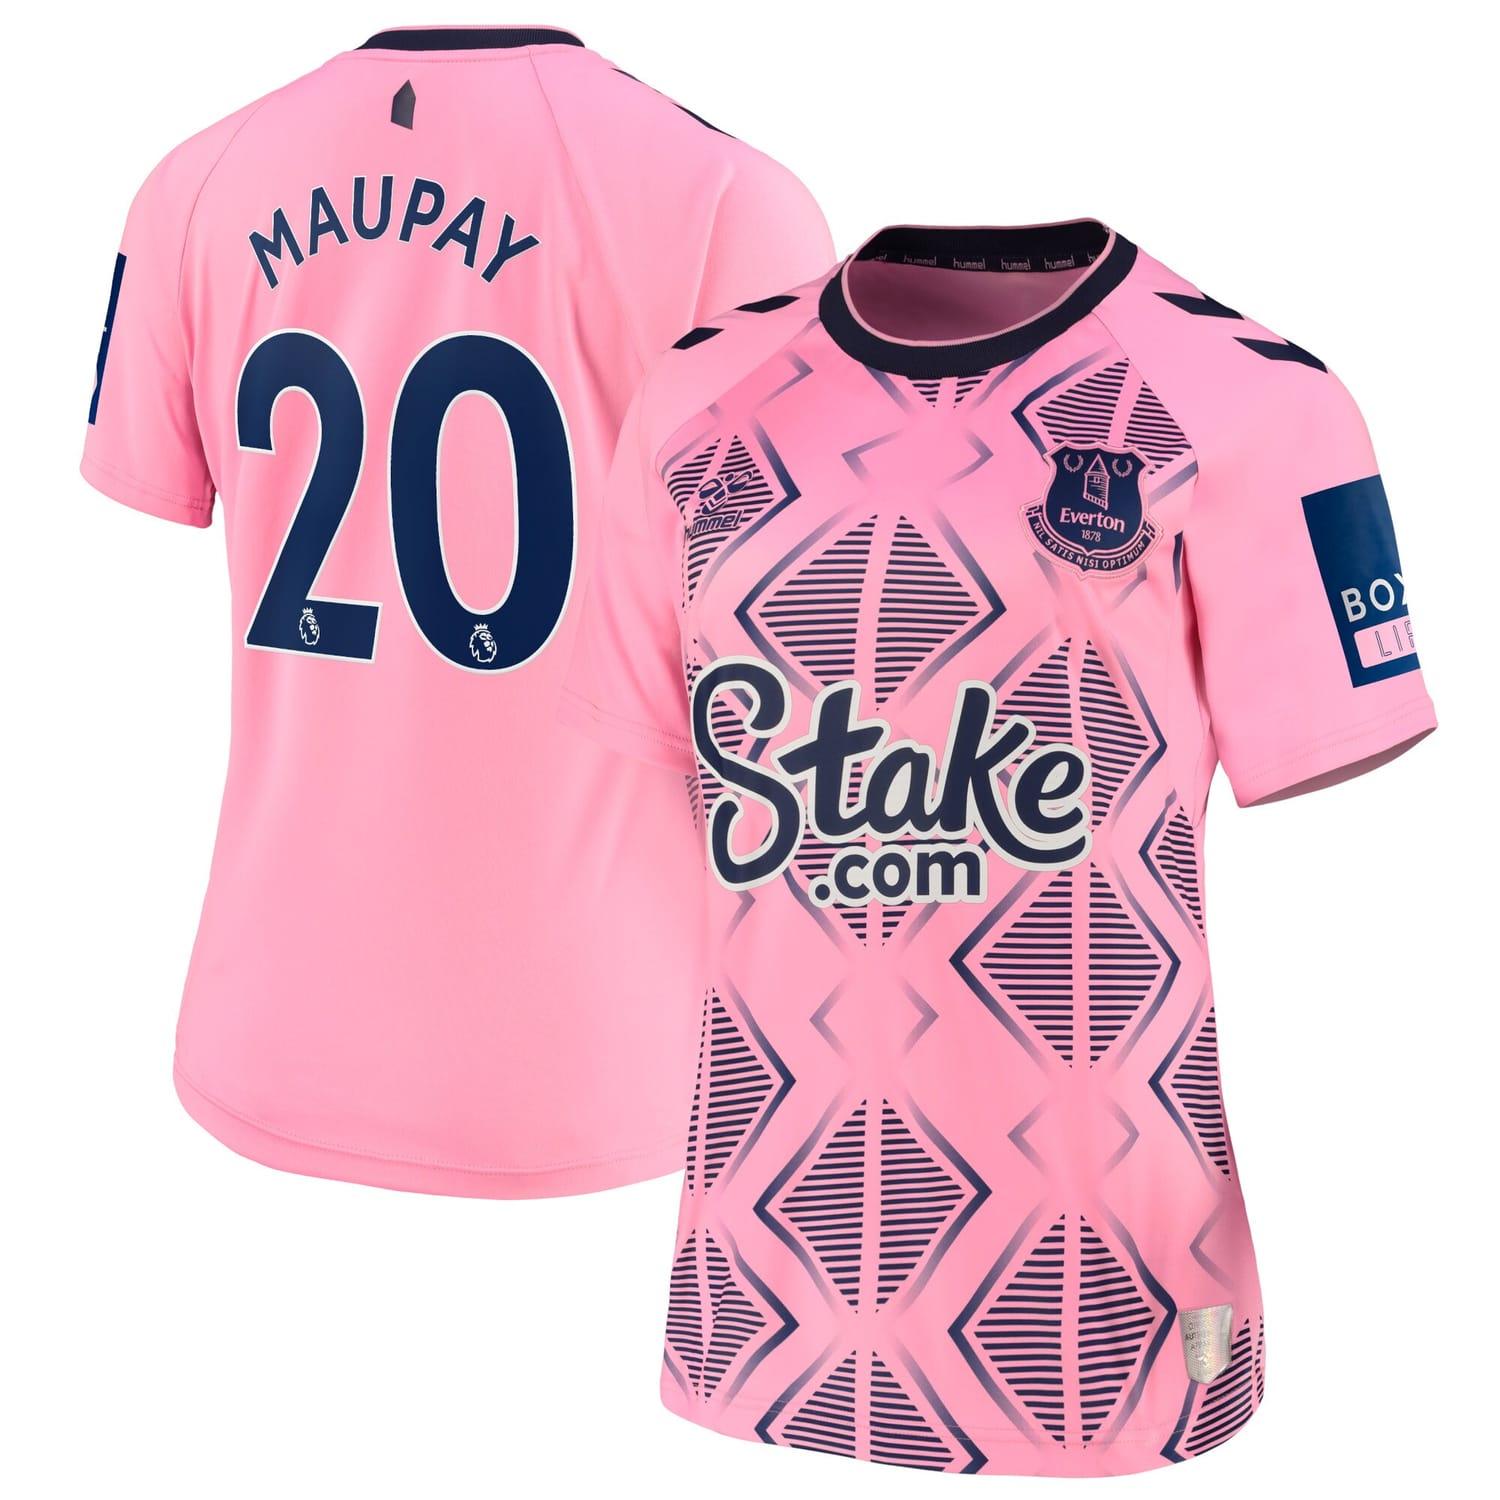 Premier League Everton Away Jersey Shirt 2022-23 player Neal Maupay 20 printing for Women